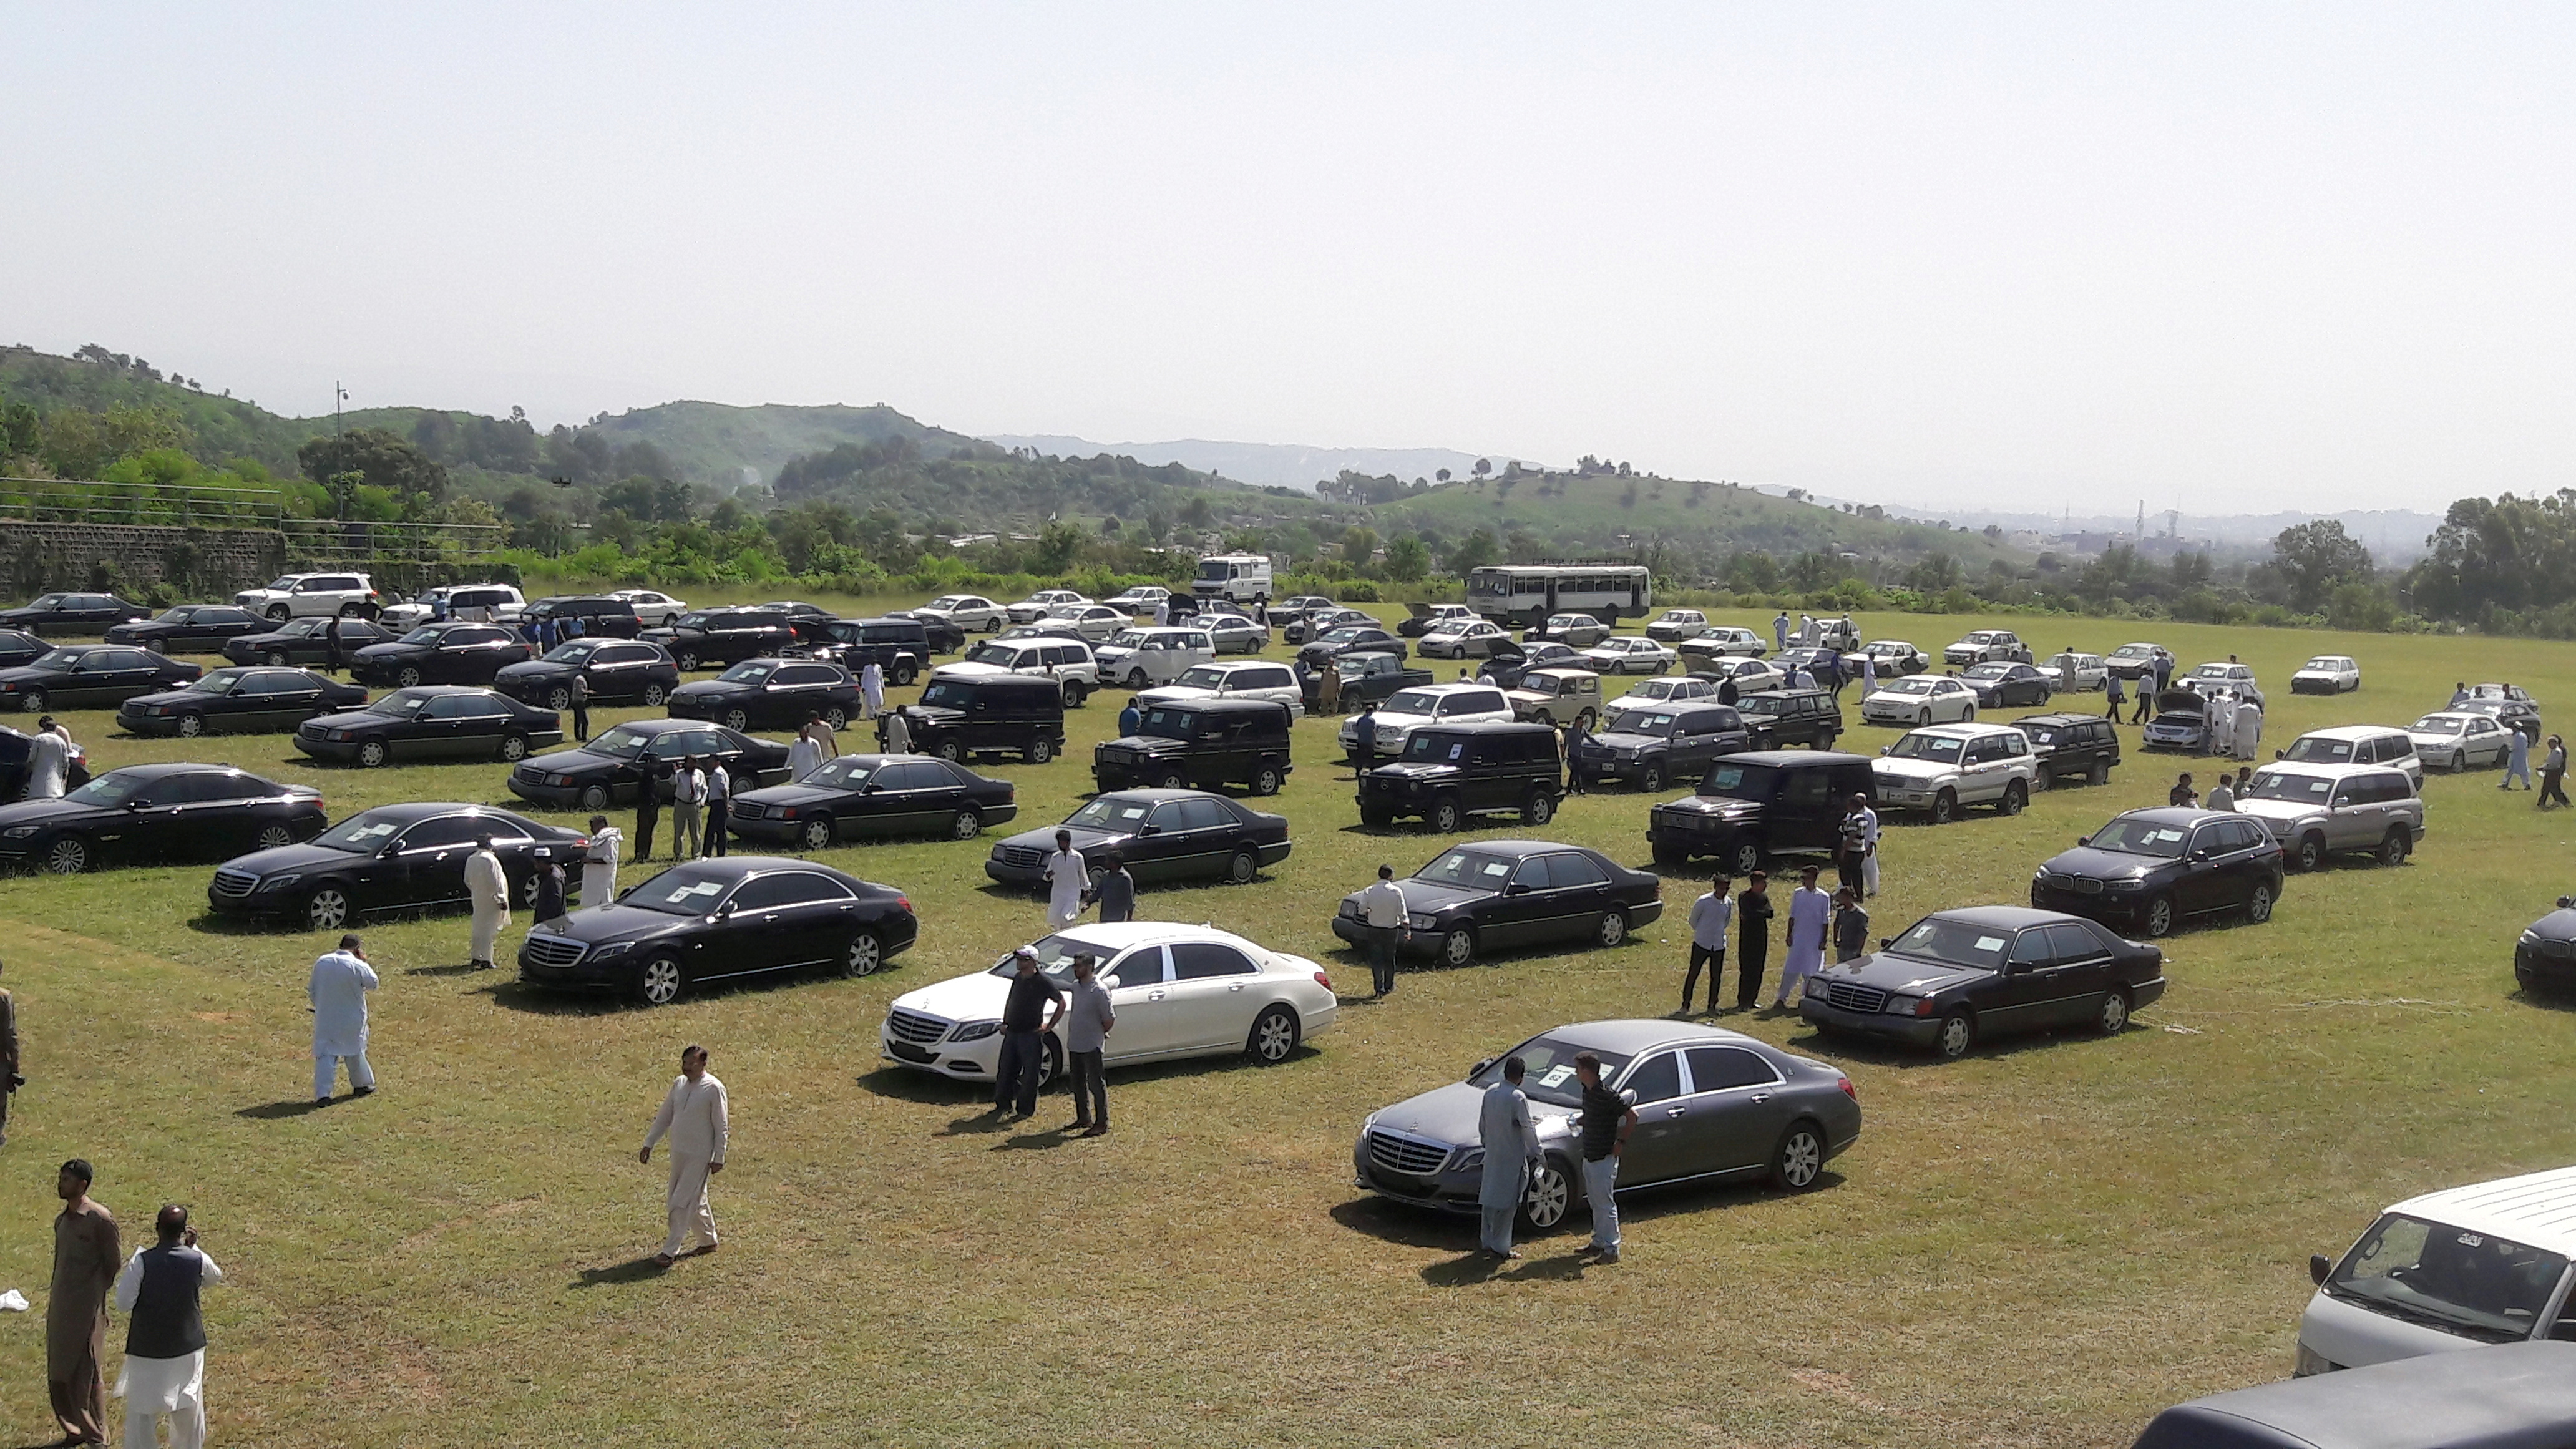 People visit an auction of government owned used cars at the premises of Prime Minister House in Islamabad, Pakistan on Sept. 17, 2018. (Faisal Mahmood—Reuters)